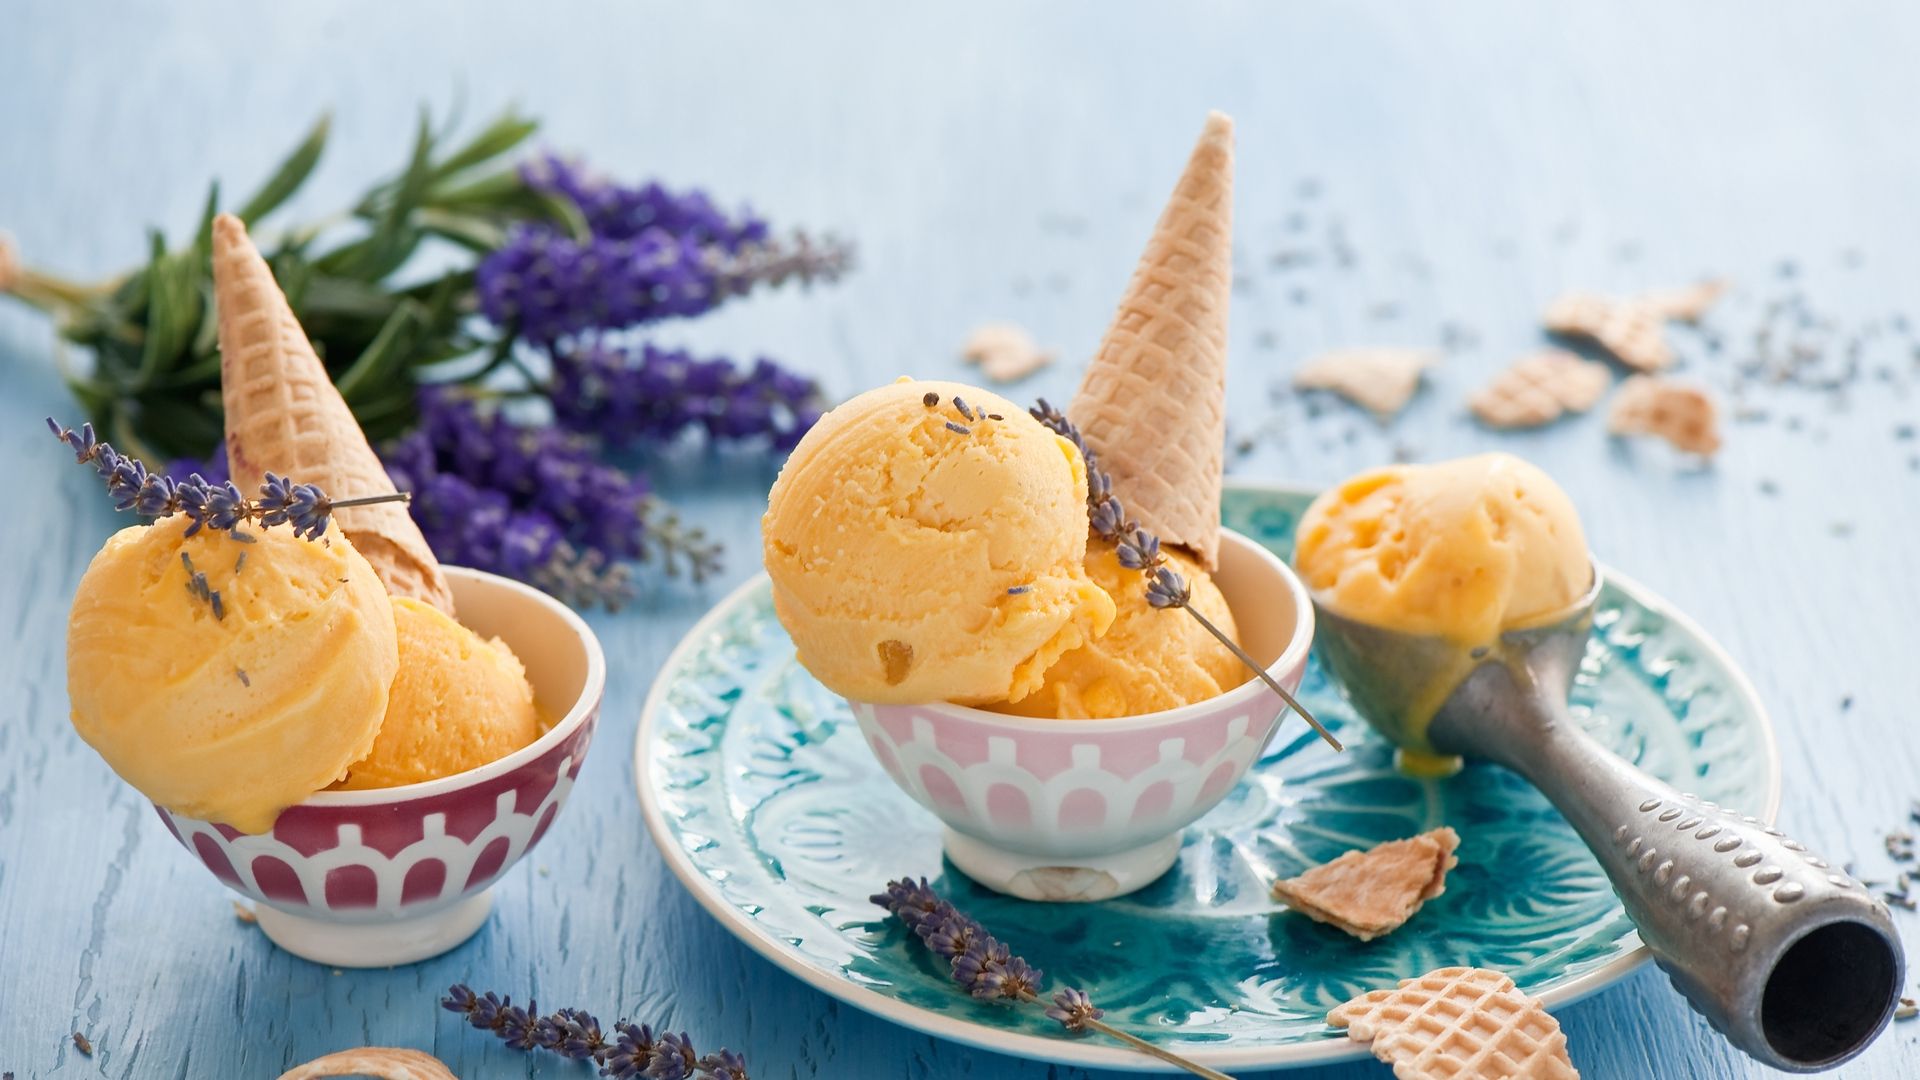 ice cream images hd free download